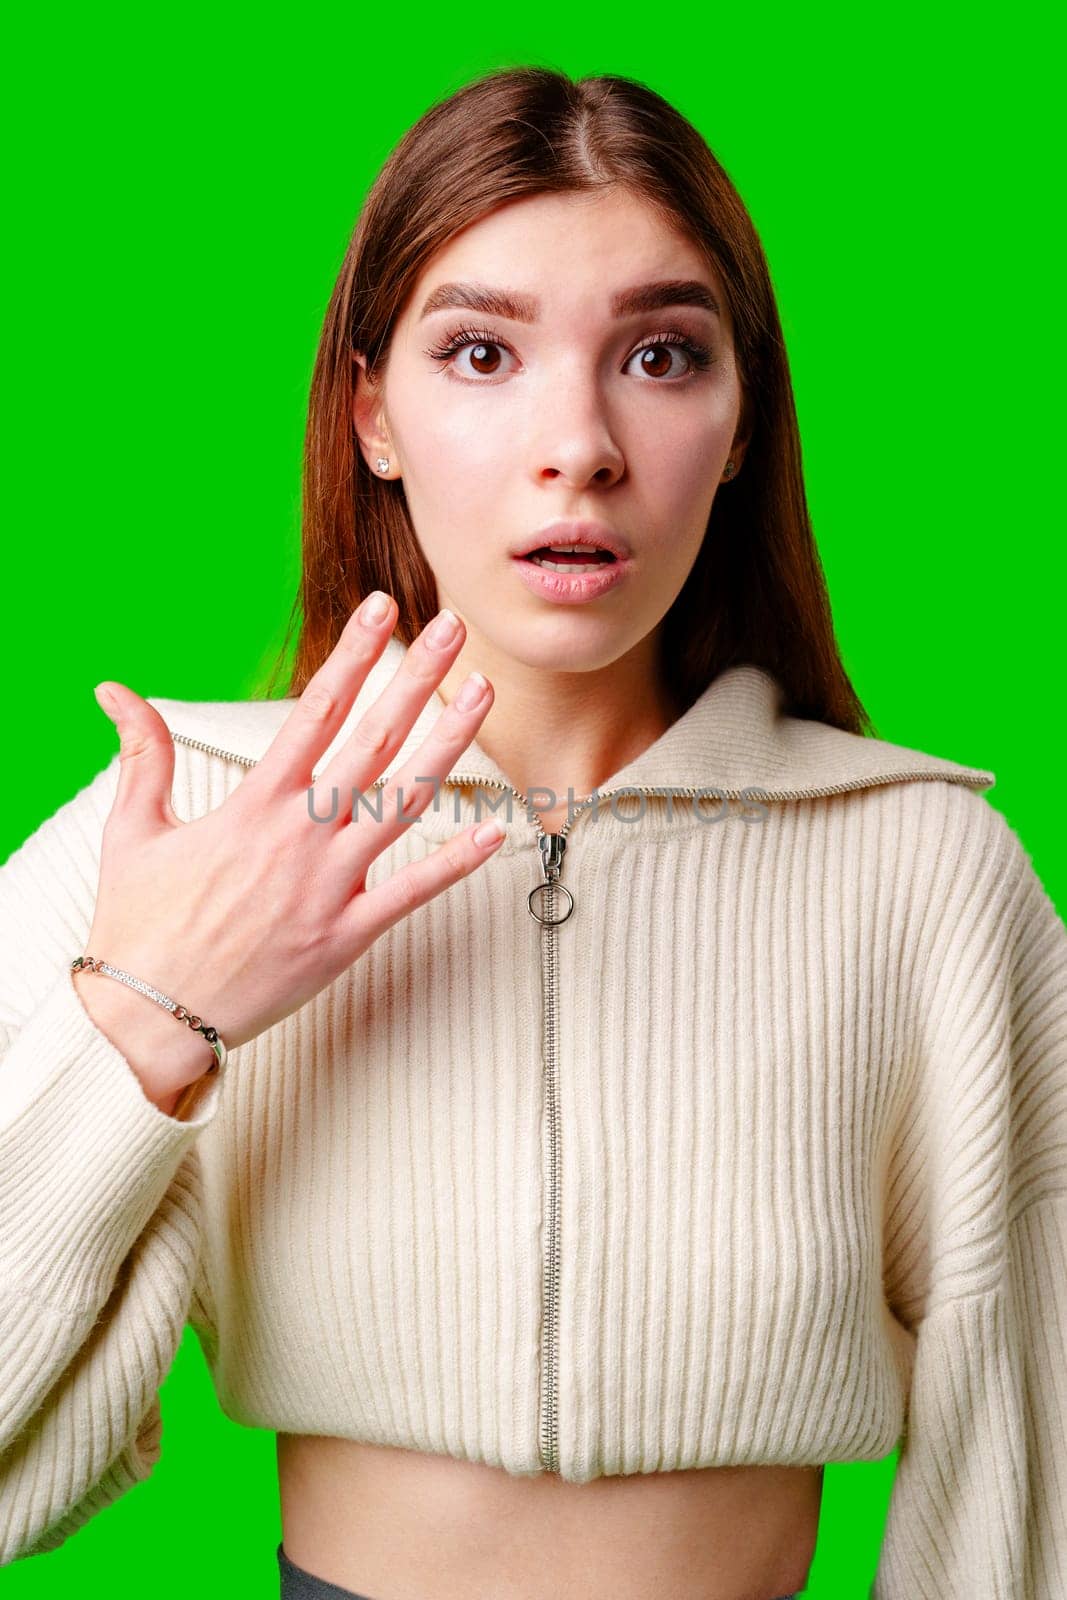 A woman wearing a white sweater is gesturing with her hand, possibly expressing emotion or emphasizing a point. by Fabrikasimf